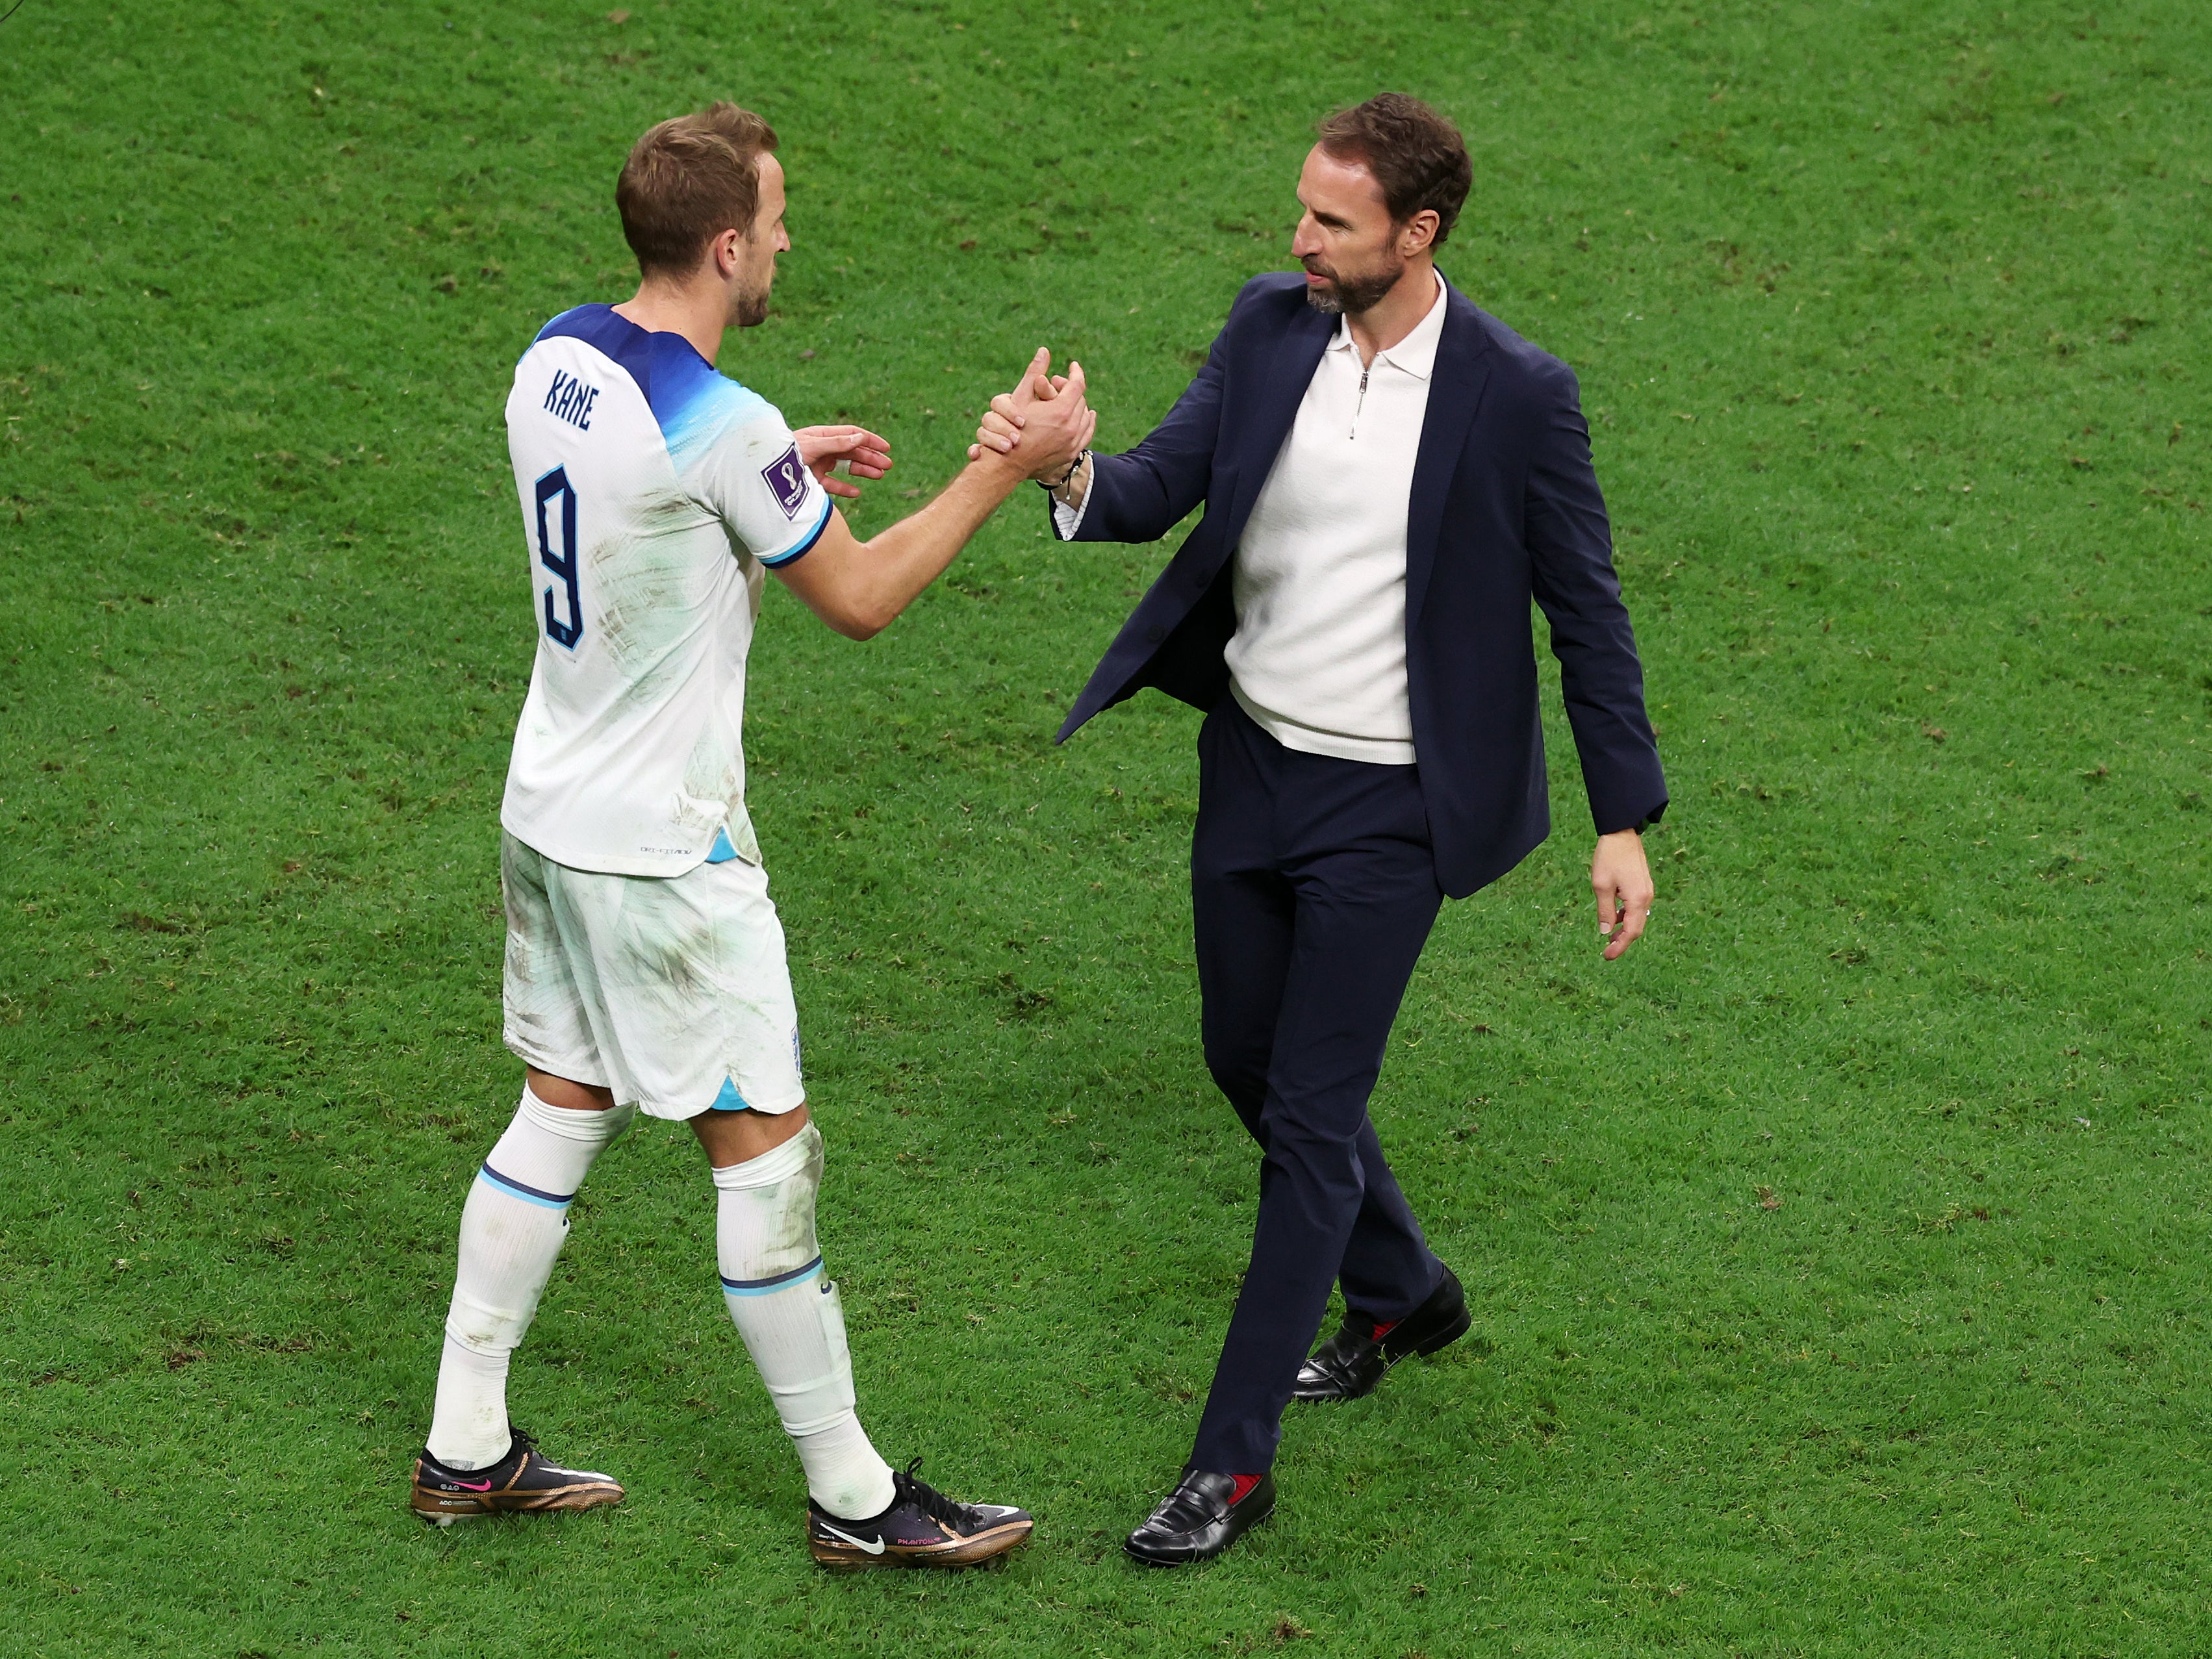 Southgate is often derided for what some see as defensive, safety first tactics